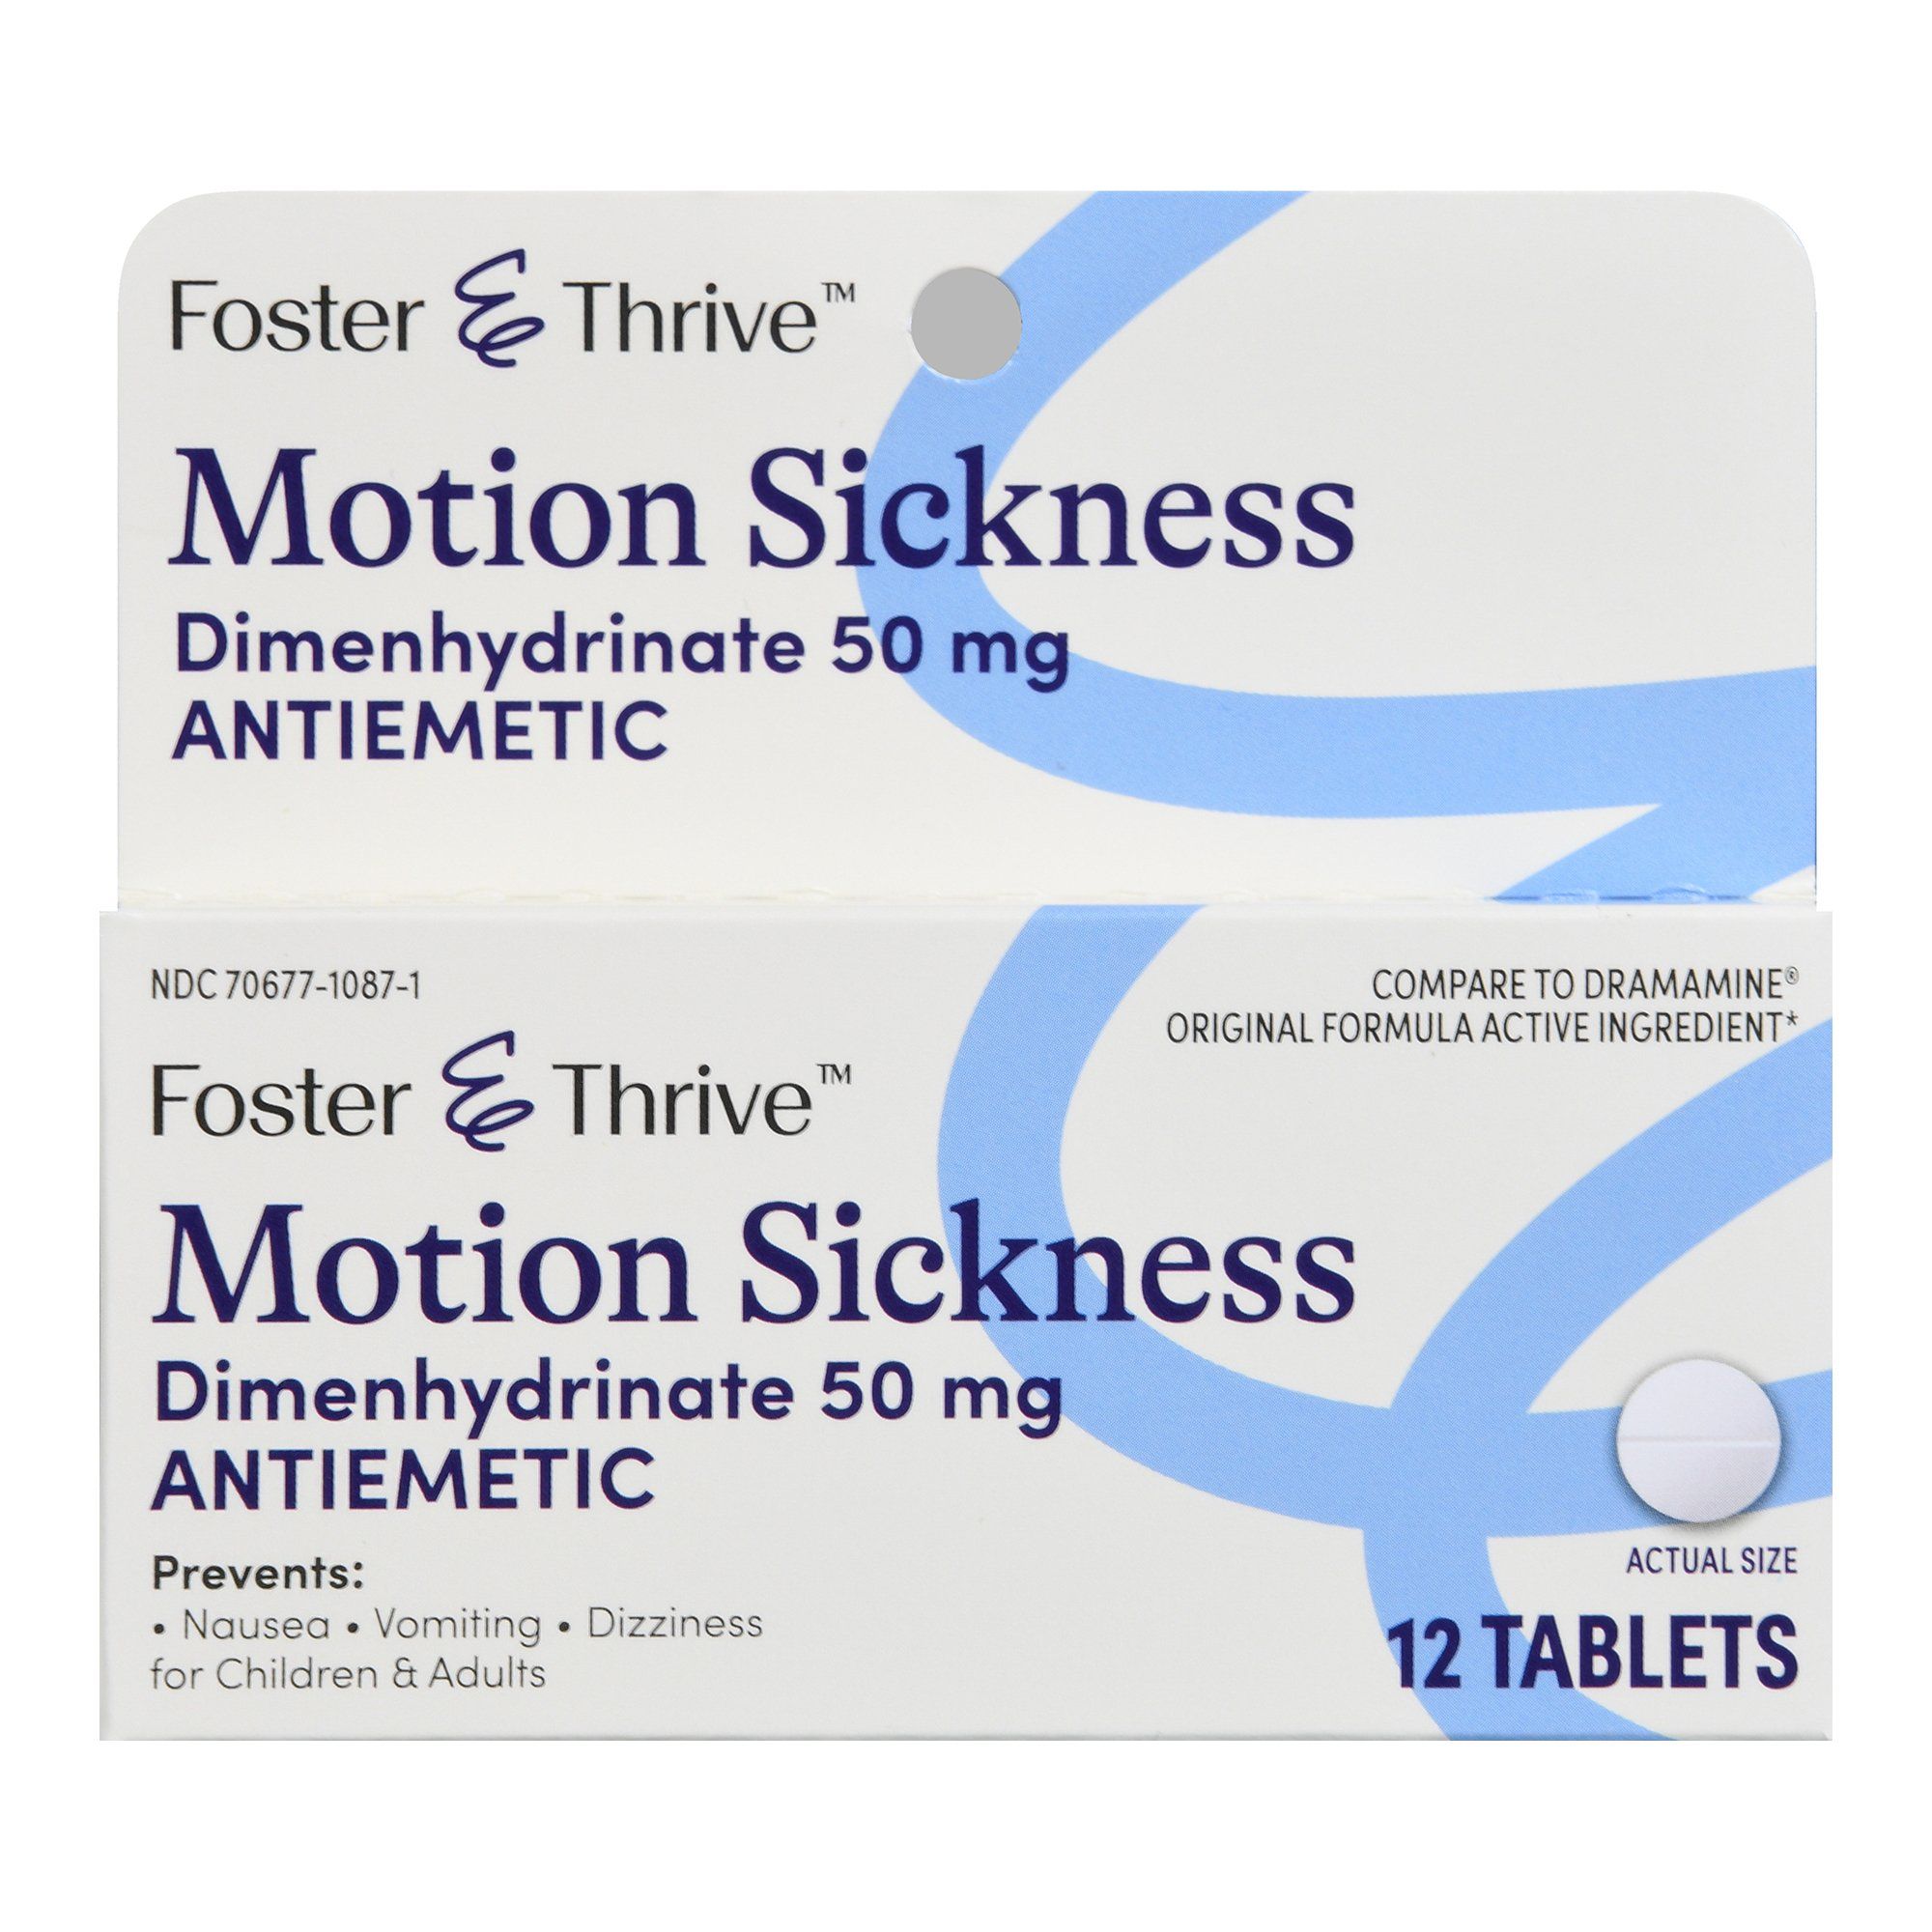 Foster & Thrive Motion Sickness Dimenhydrinate Tablets, 50 mg - 12 ct